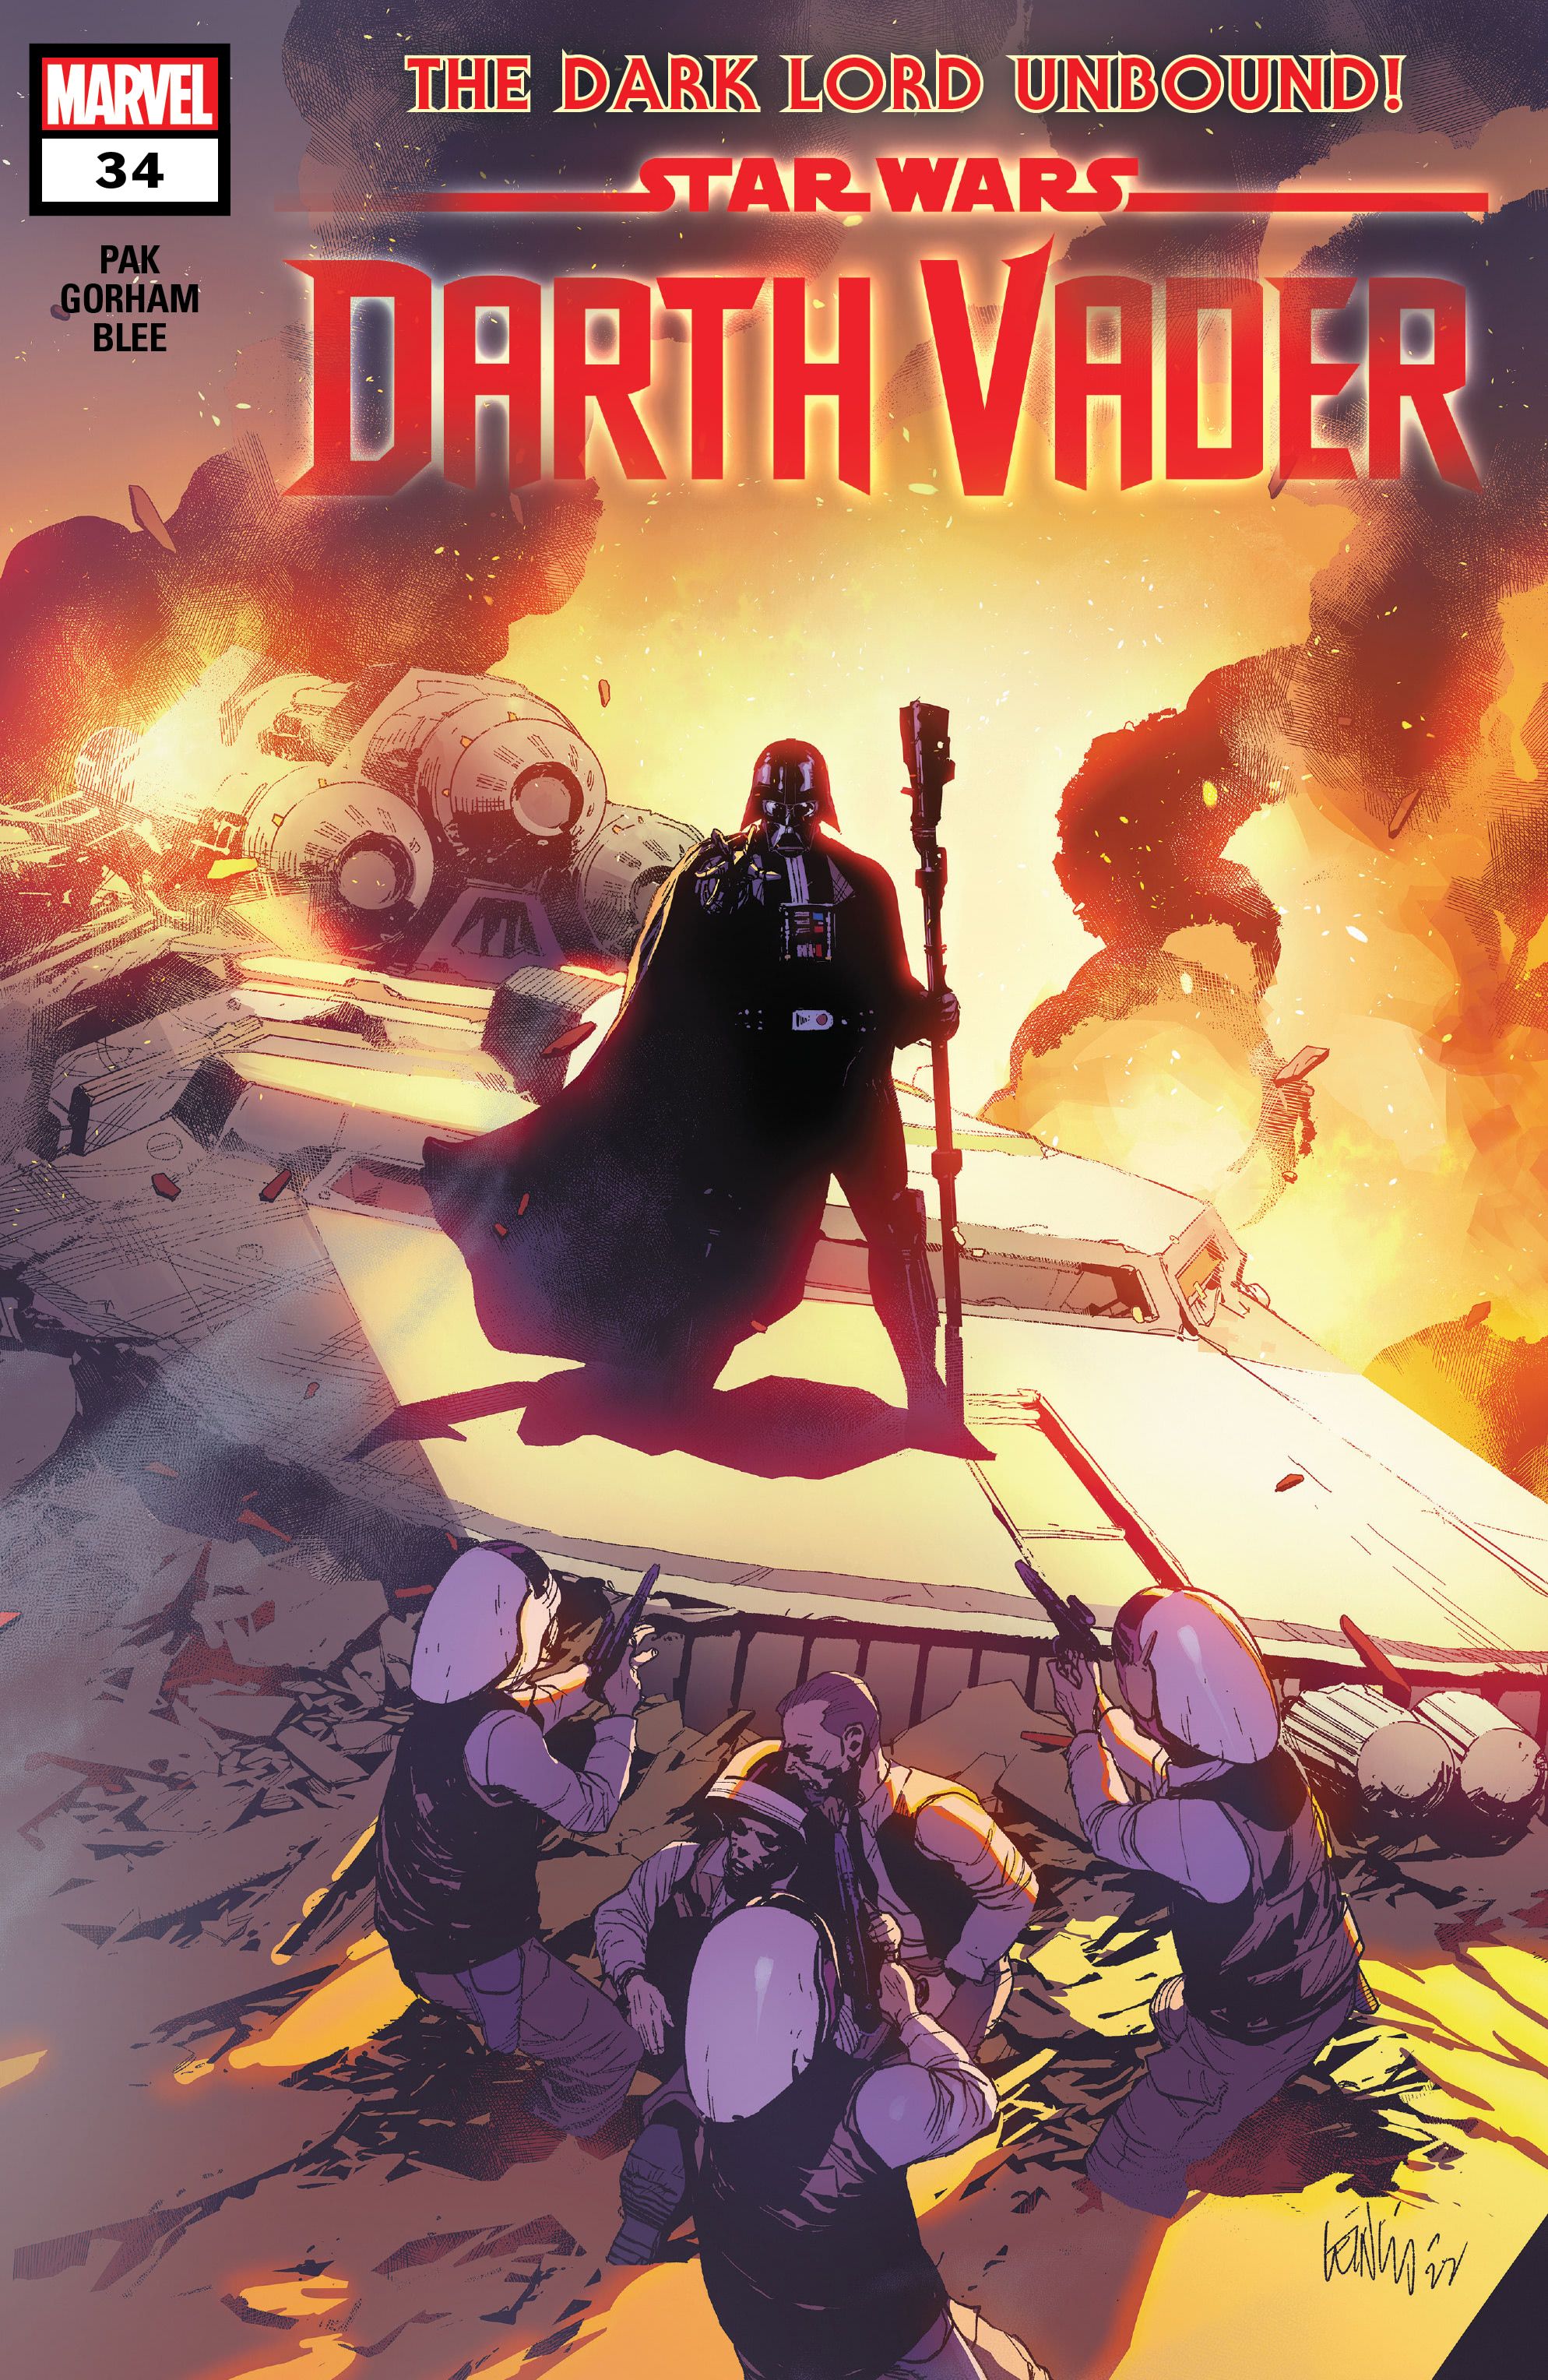 Star Wars Darth Vader #34 depicting Darth Vader standing on top of a wrecked ship.